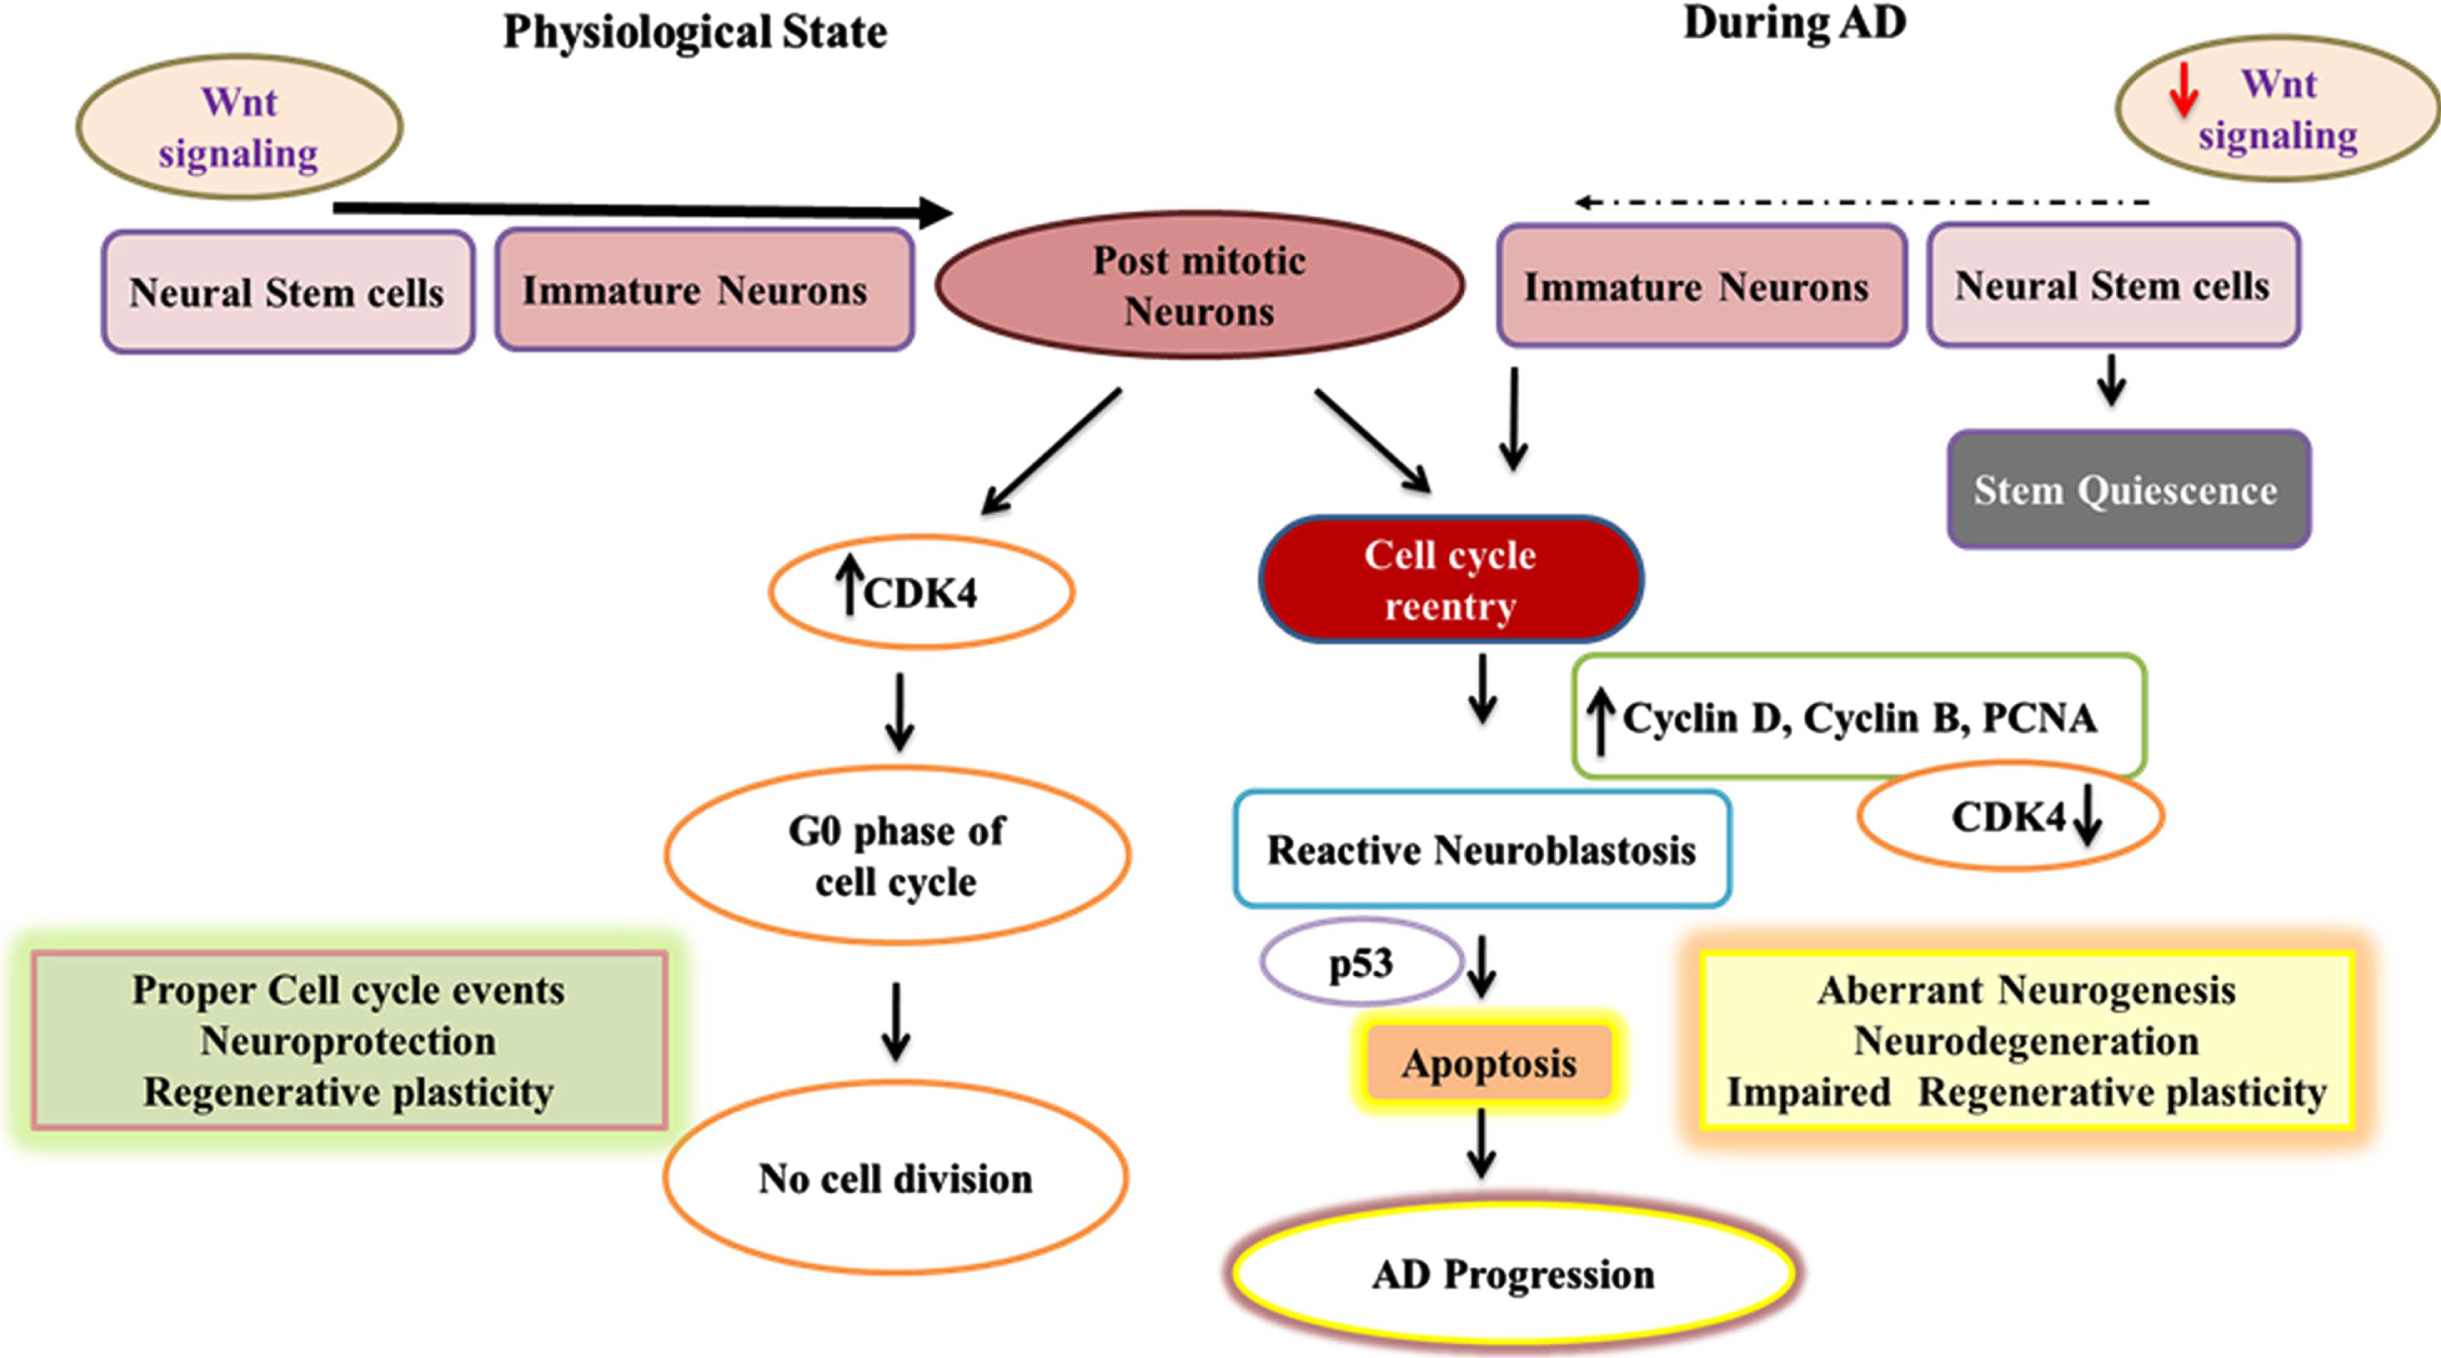 Adult neurogenesis in physiological state and mechanisms of cell cycle reentry of post-mitotic neurons in AD. This fig depicts the flowchart describing neurogenic process and the cell cycle reentry of post-mitotic neurons in association with Wnt signaling in healthy and AD conditions. In the normal brain, expression of CDK4 maintains the post-mitotic neurons at the G0 cell cycle phase whereas in the pathogenic process of AD the elevated expression of cyclin D, Cyclin B, and PCNA and downregulation of CDK4 results in the cell cycle reentry of post-mitotic neurons resulting in reactive neuroblastosis through the activation of Wnt signaling. Further, the activation of p53 in neurons can lead to apoptosis accounting for neurodegeneration in AD.